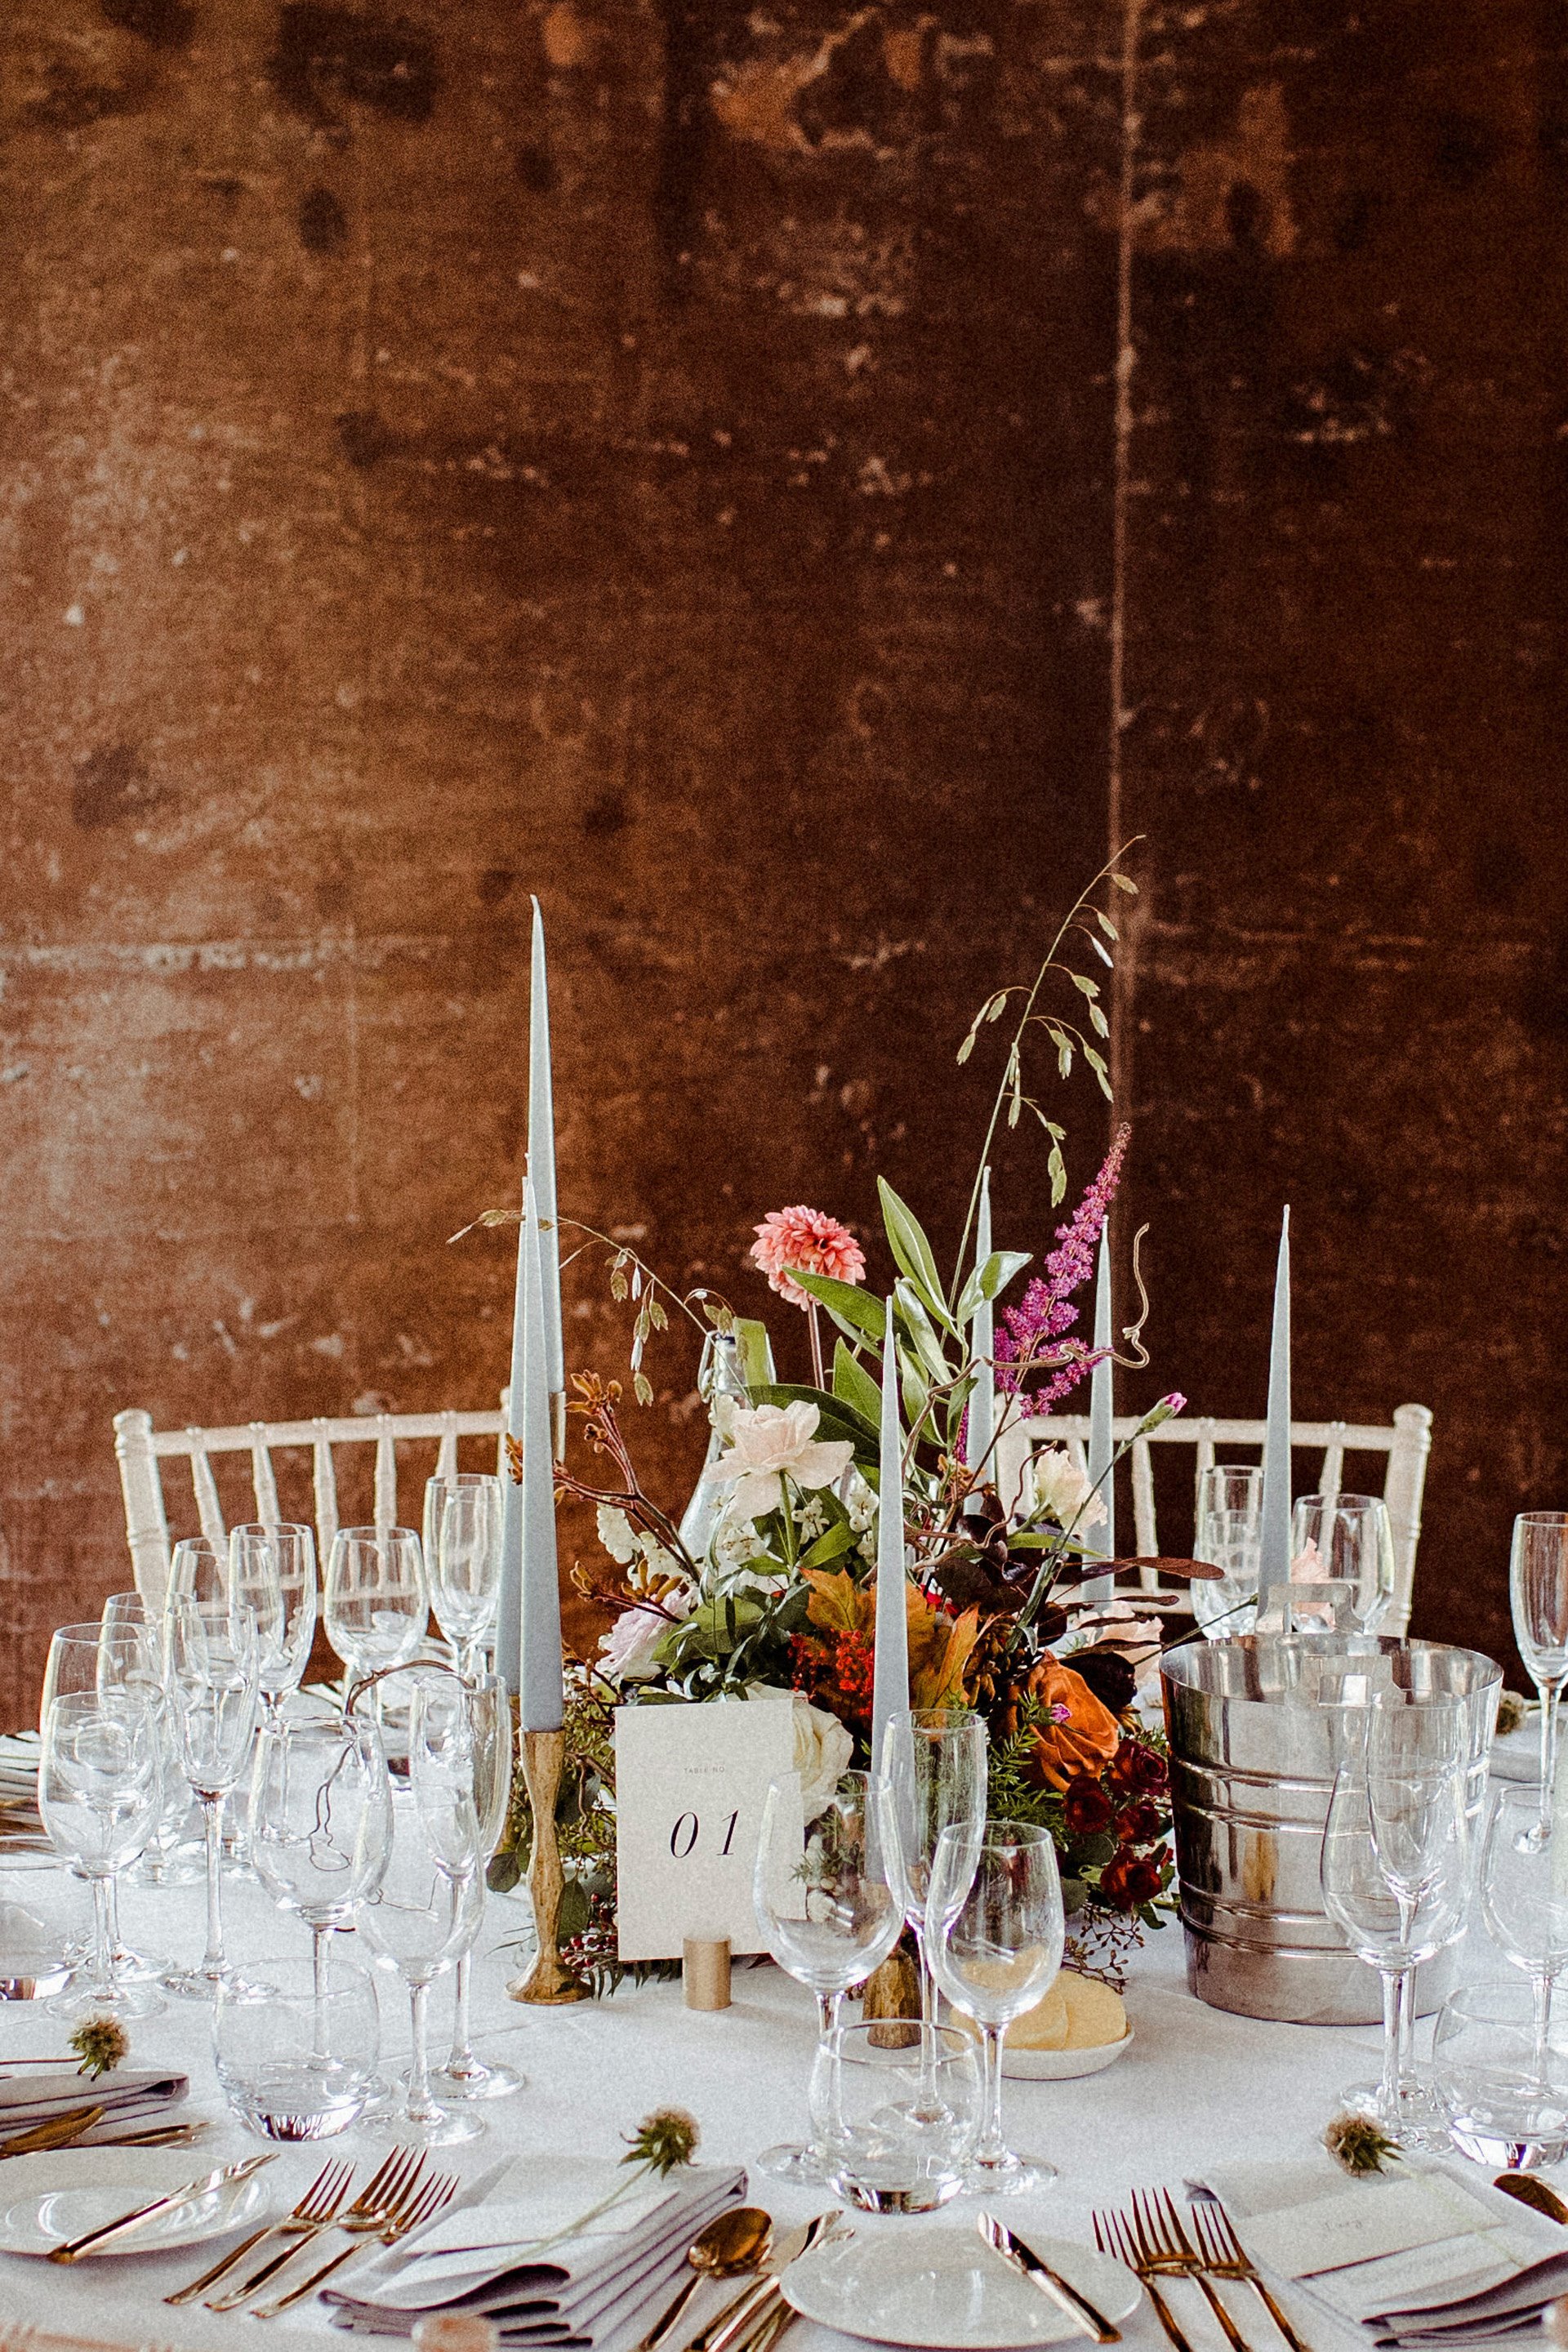 Autumn wedding decor on a round table with white table cloth against earthy walls of eco reception venue